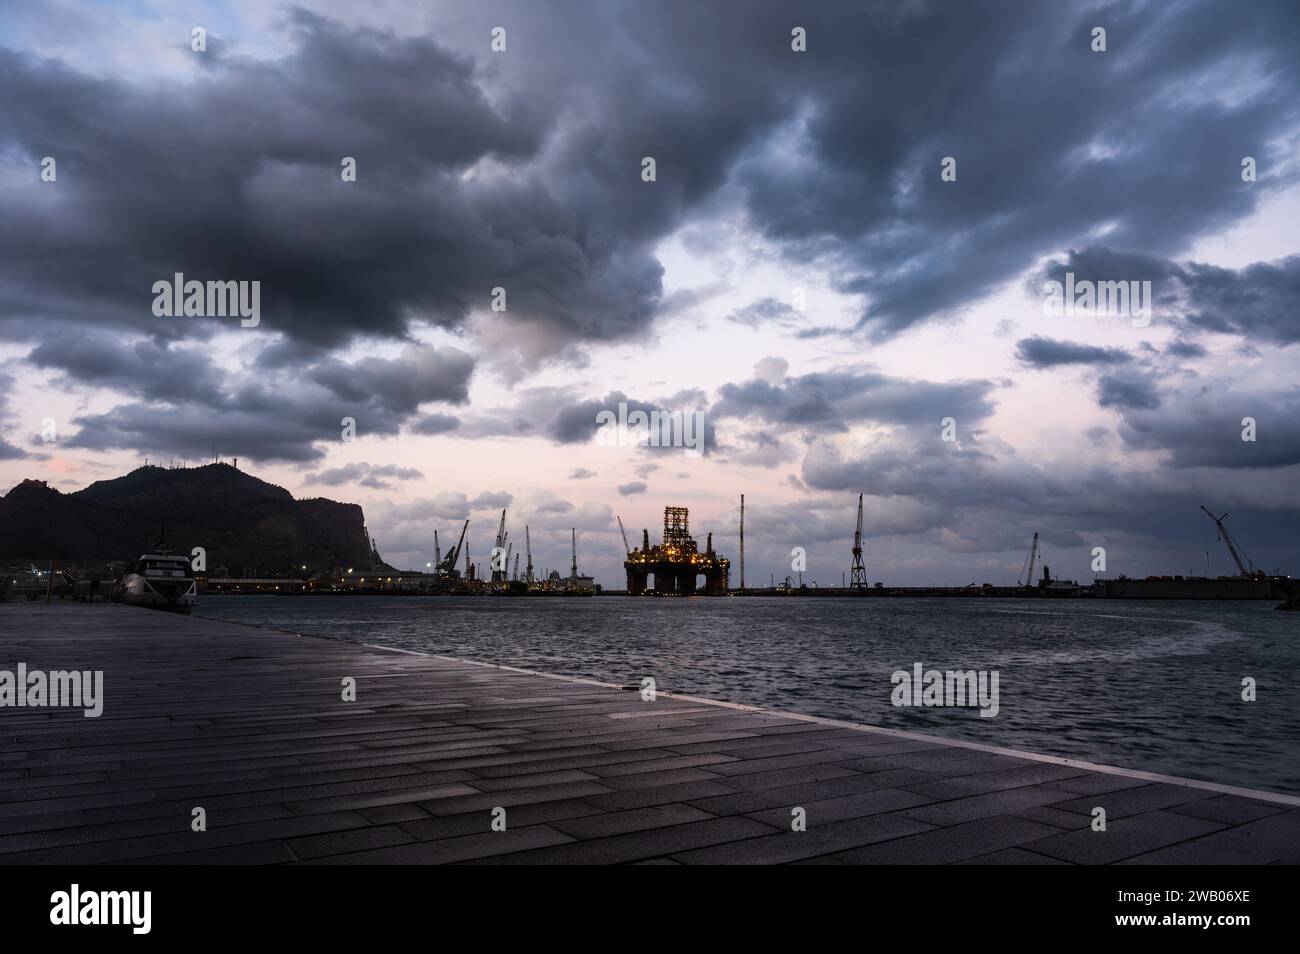 Palmero, Sicily, Italy, December 16, 2023 - The promenade at the port during a stormy evening Stock Photo